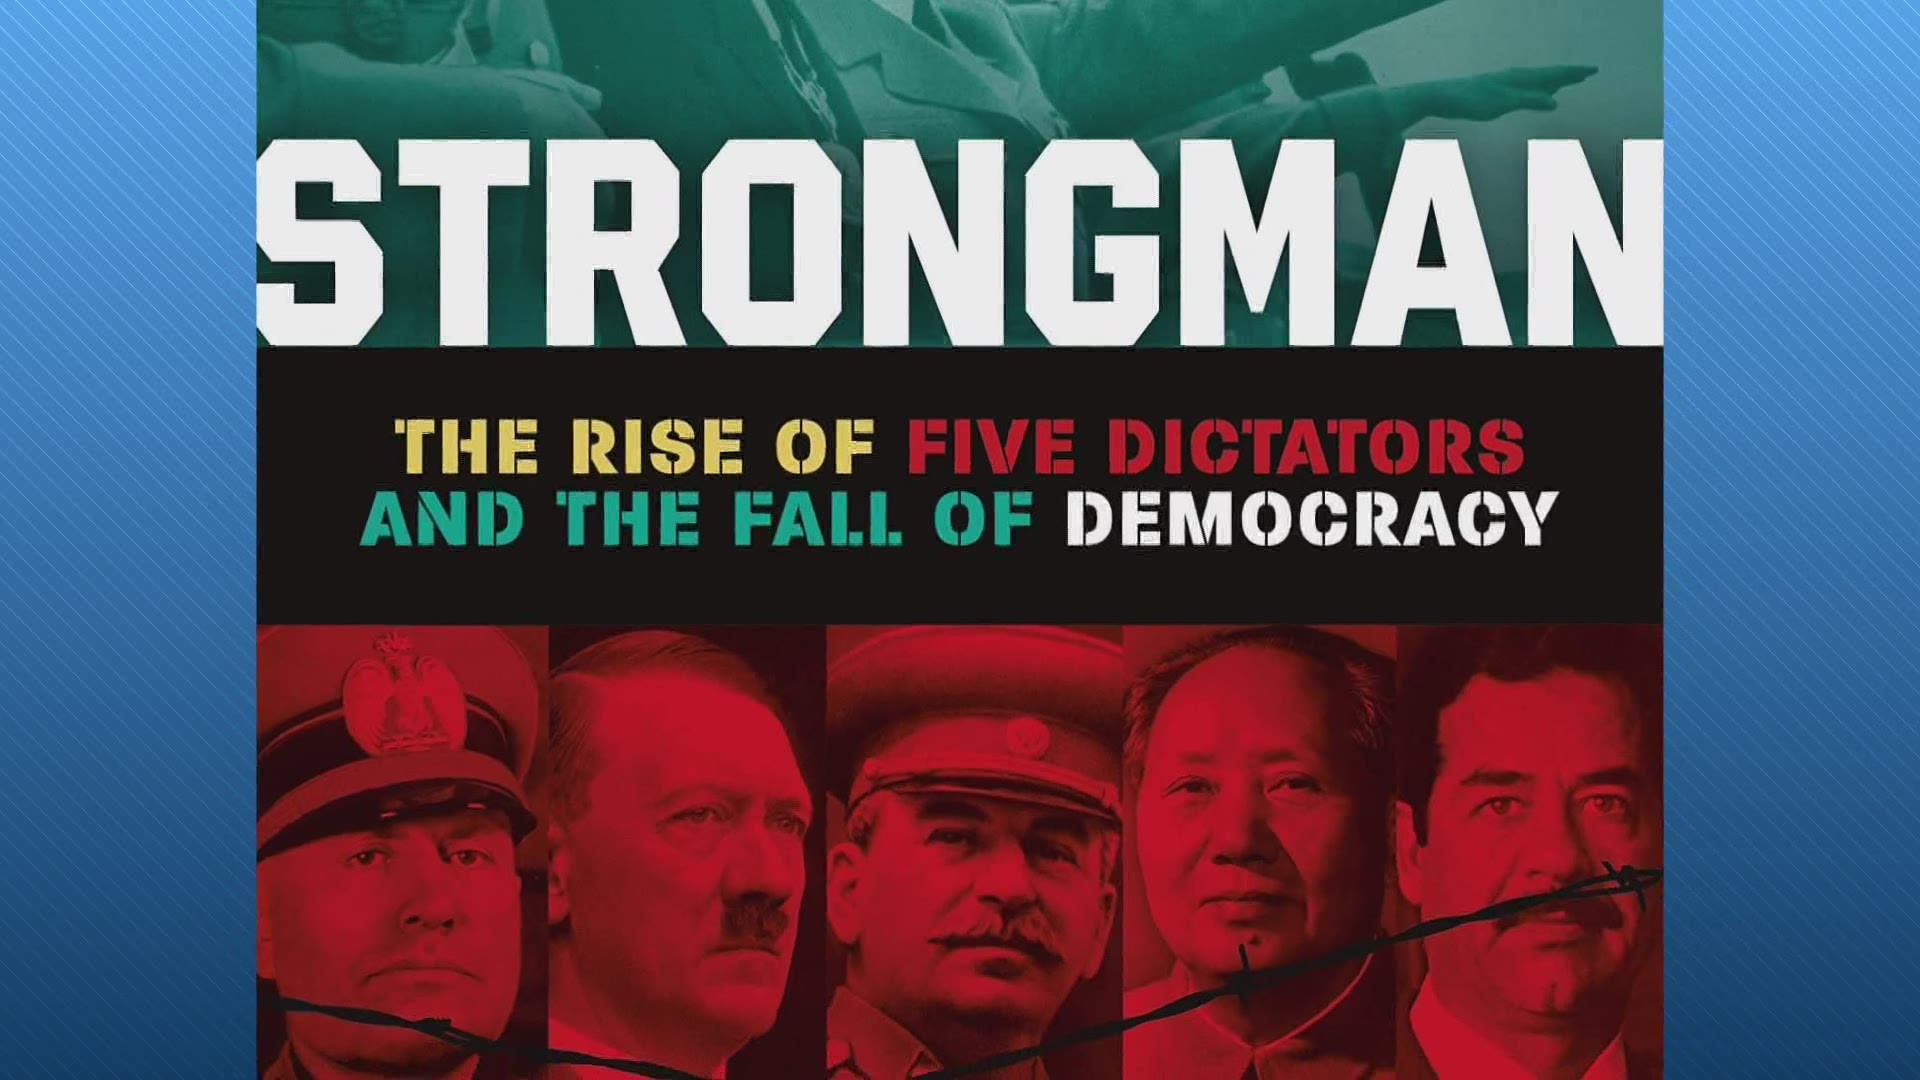 Lessons to be learned from the rise of dictators.